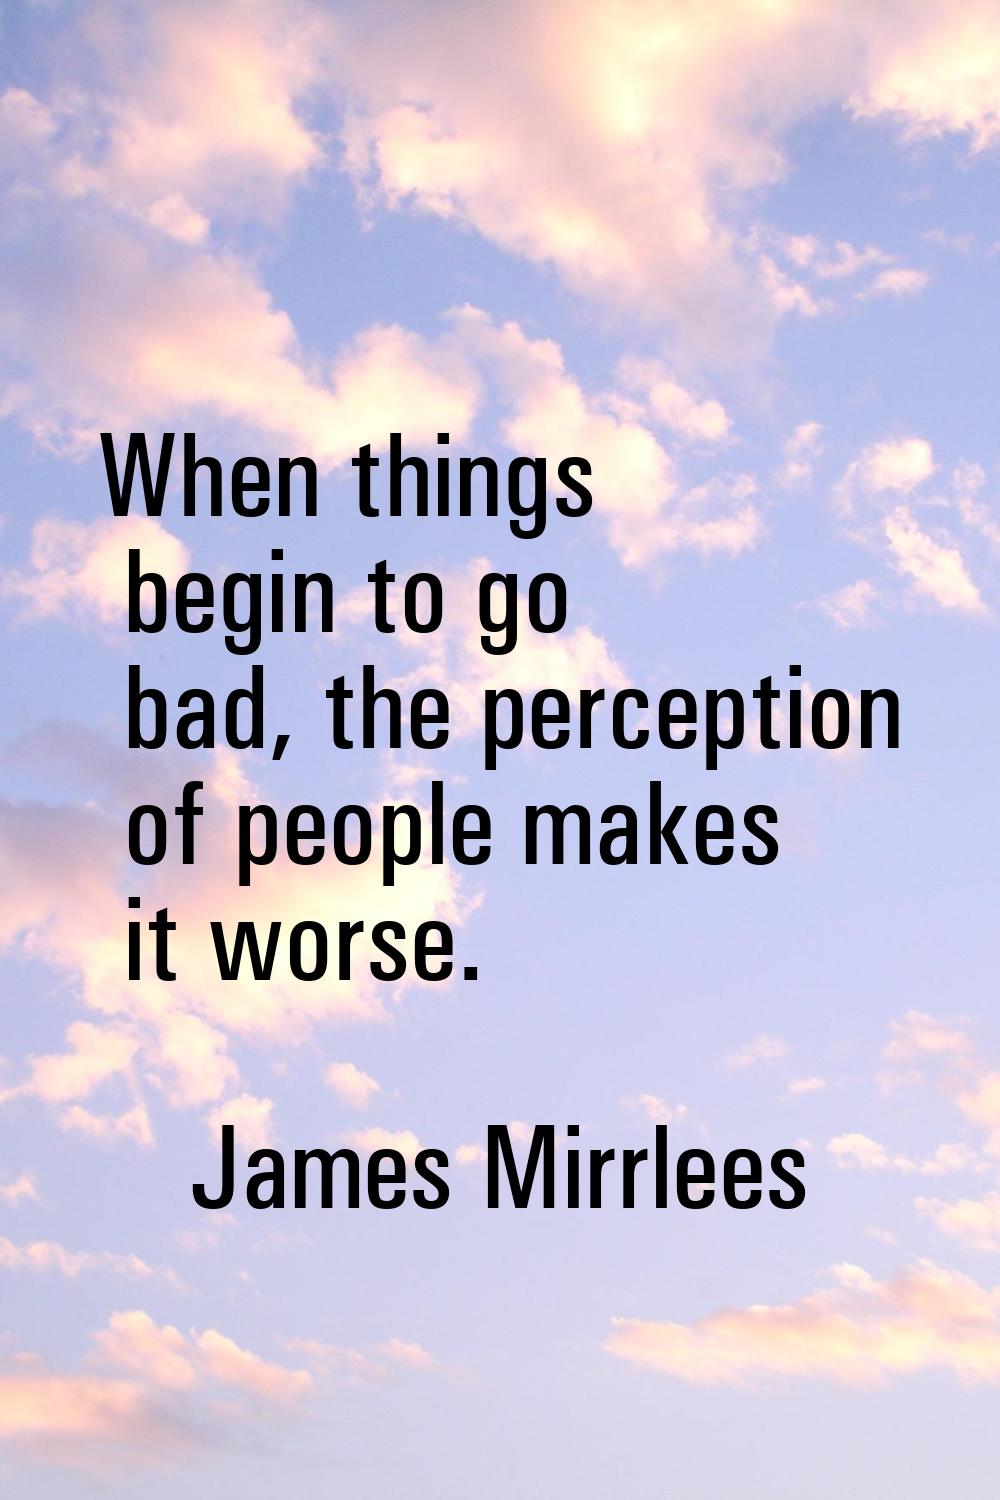 When things begin to go bad, the perception of people makes it worse.